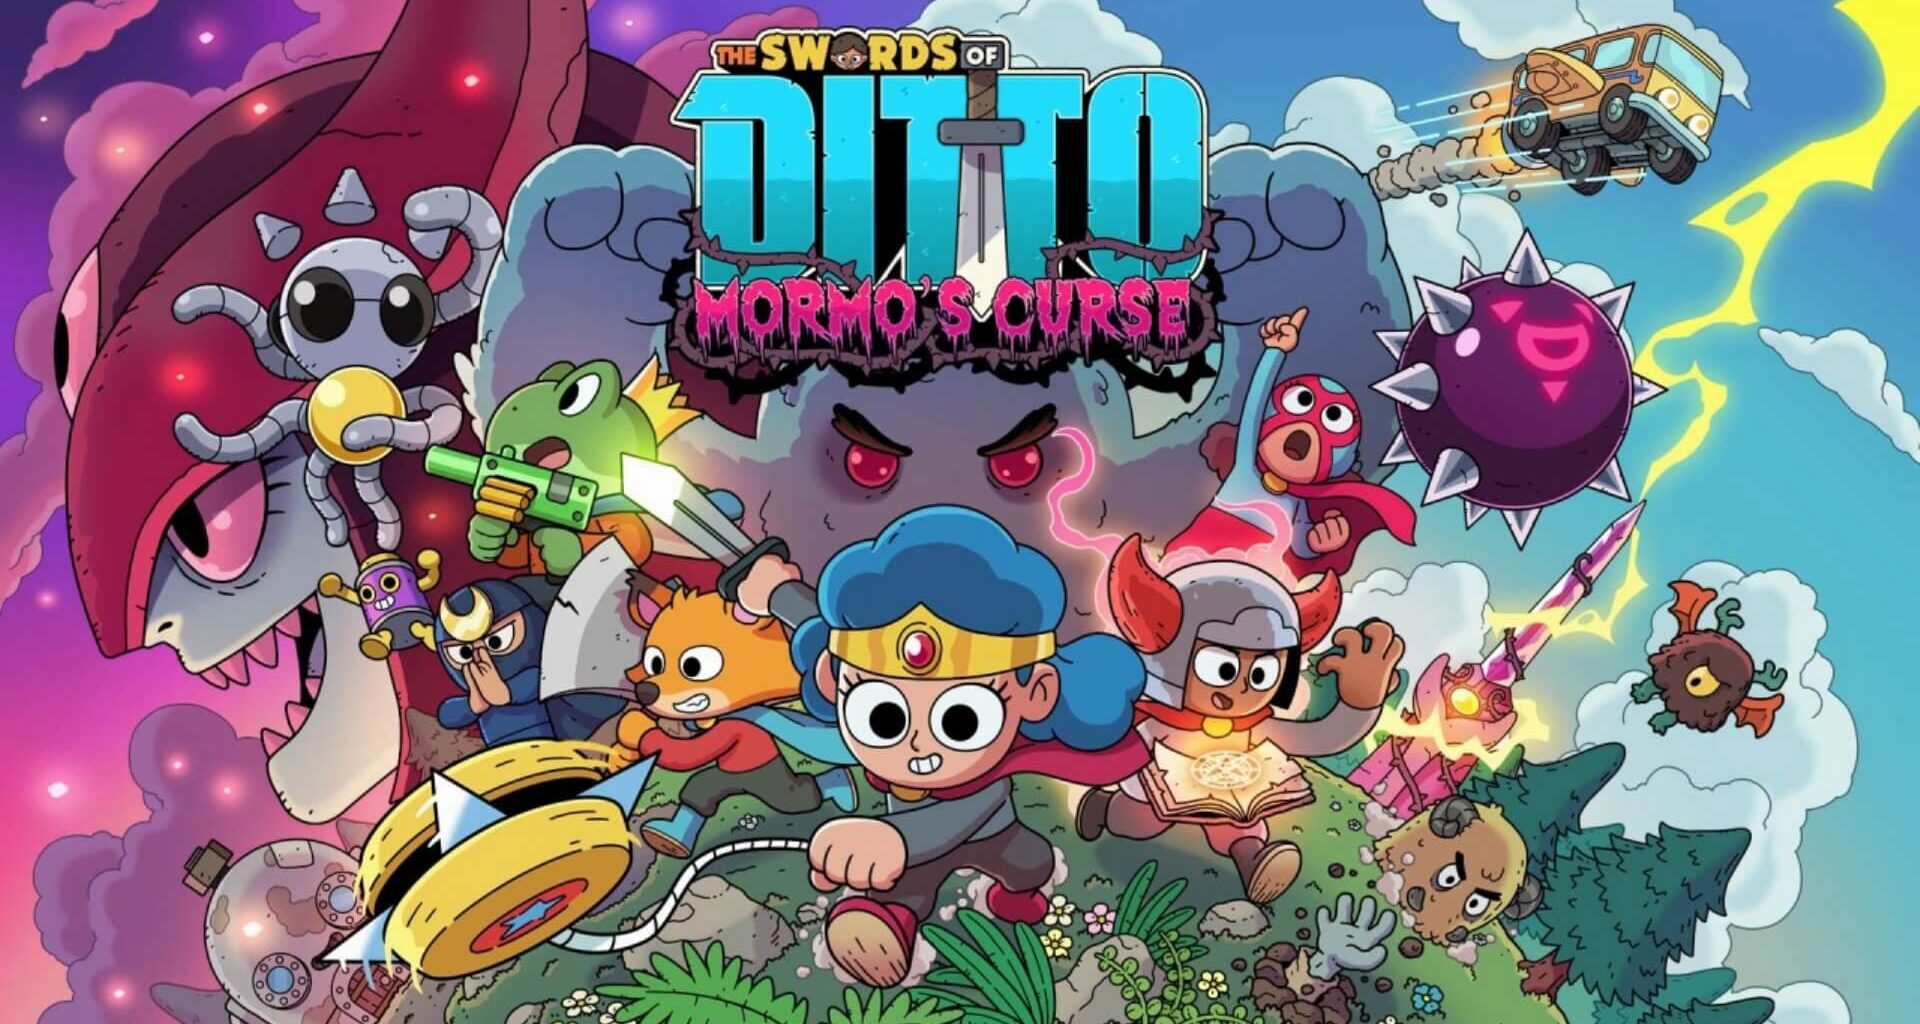 Swords of ditto